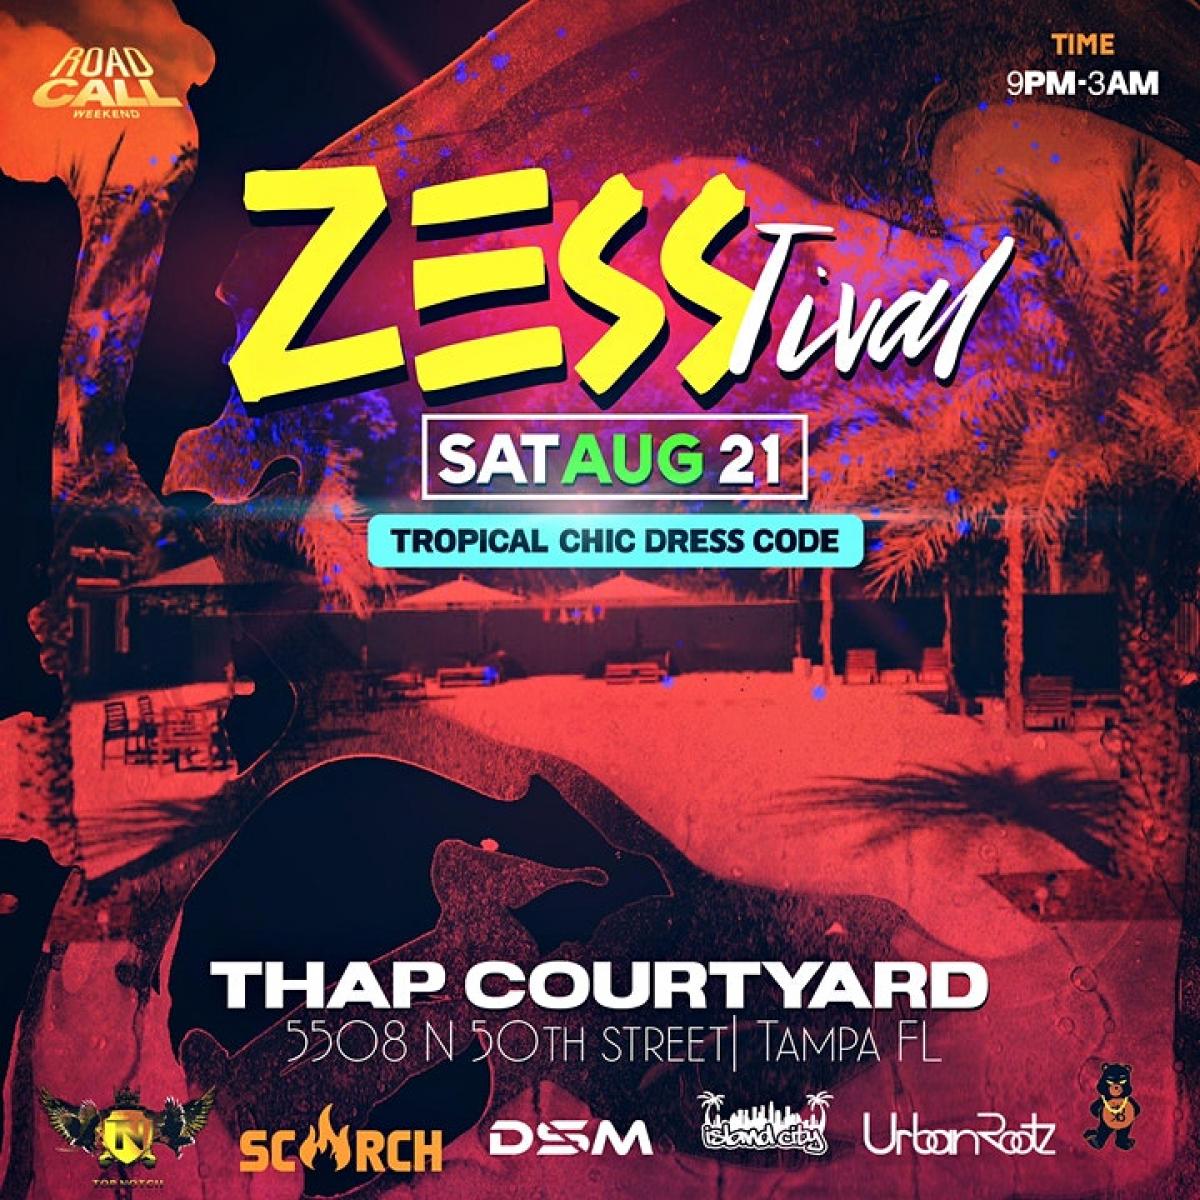 ZESS.tival The Ultimate Tropical Chic Fete flyer or graphic.